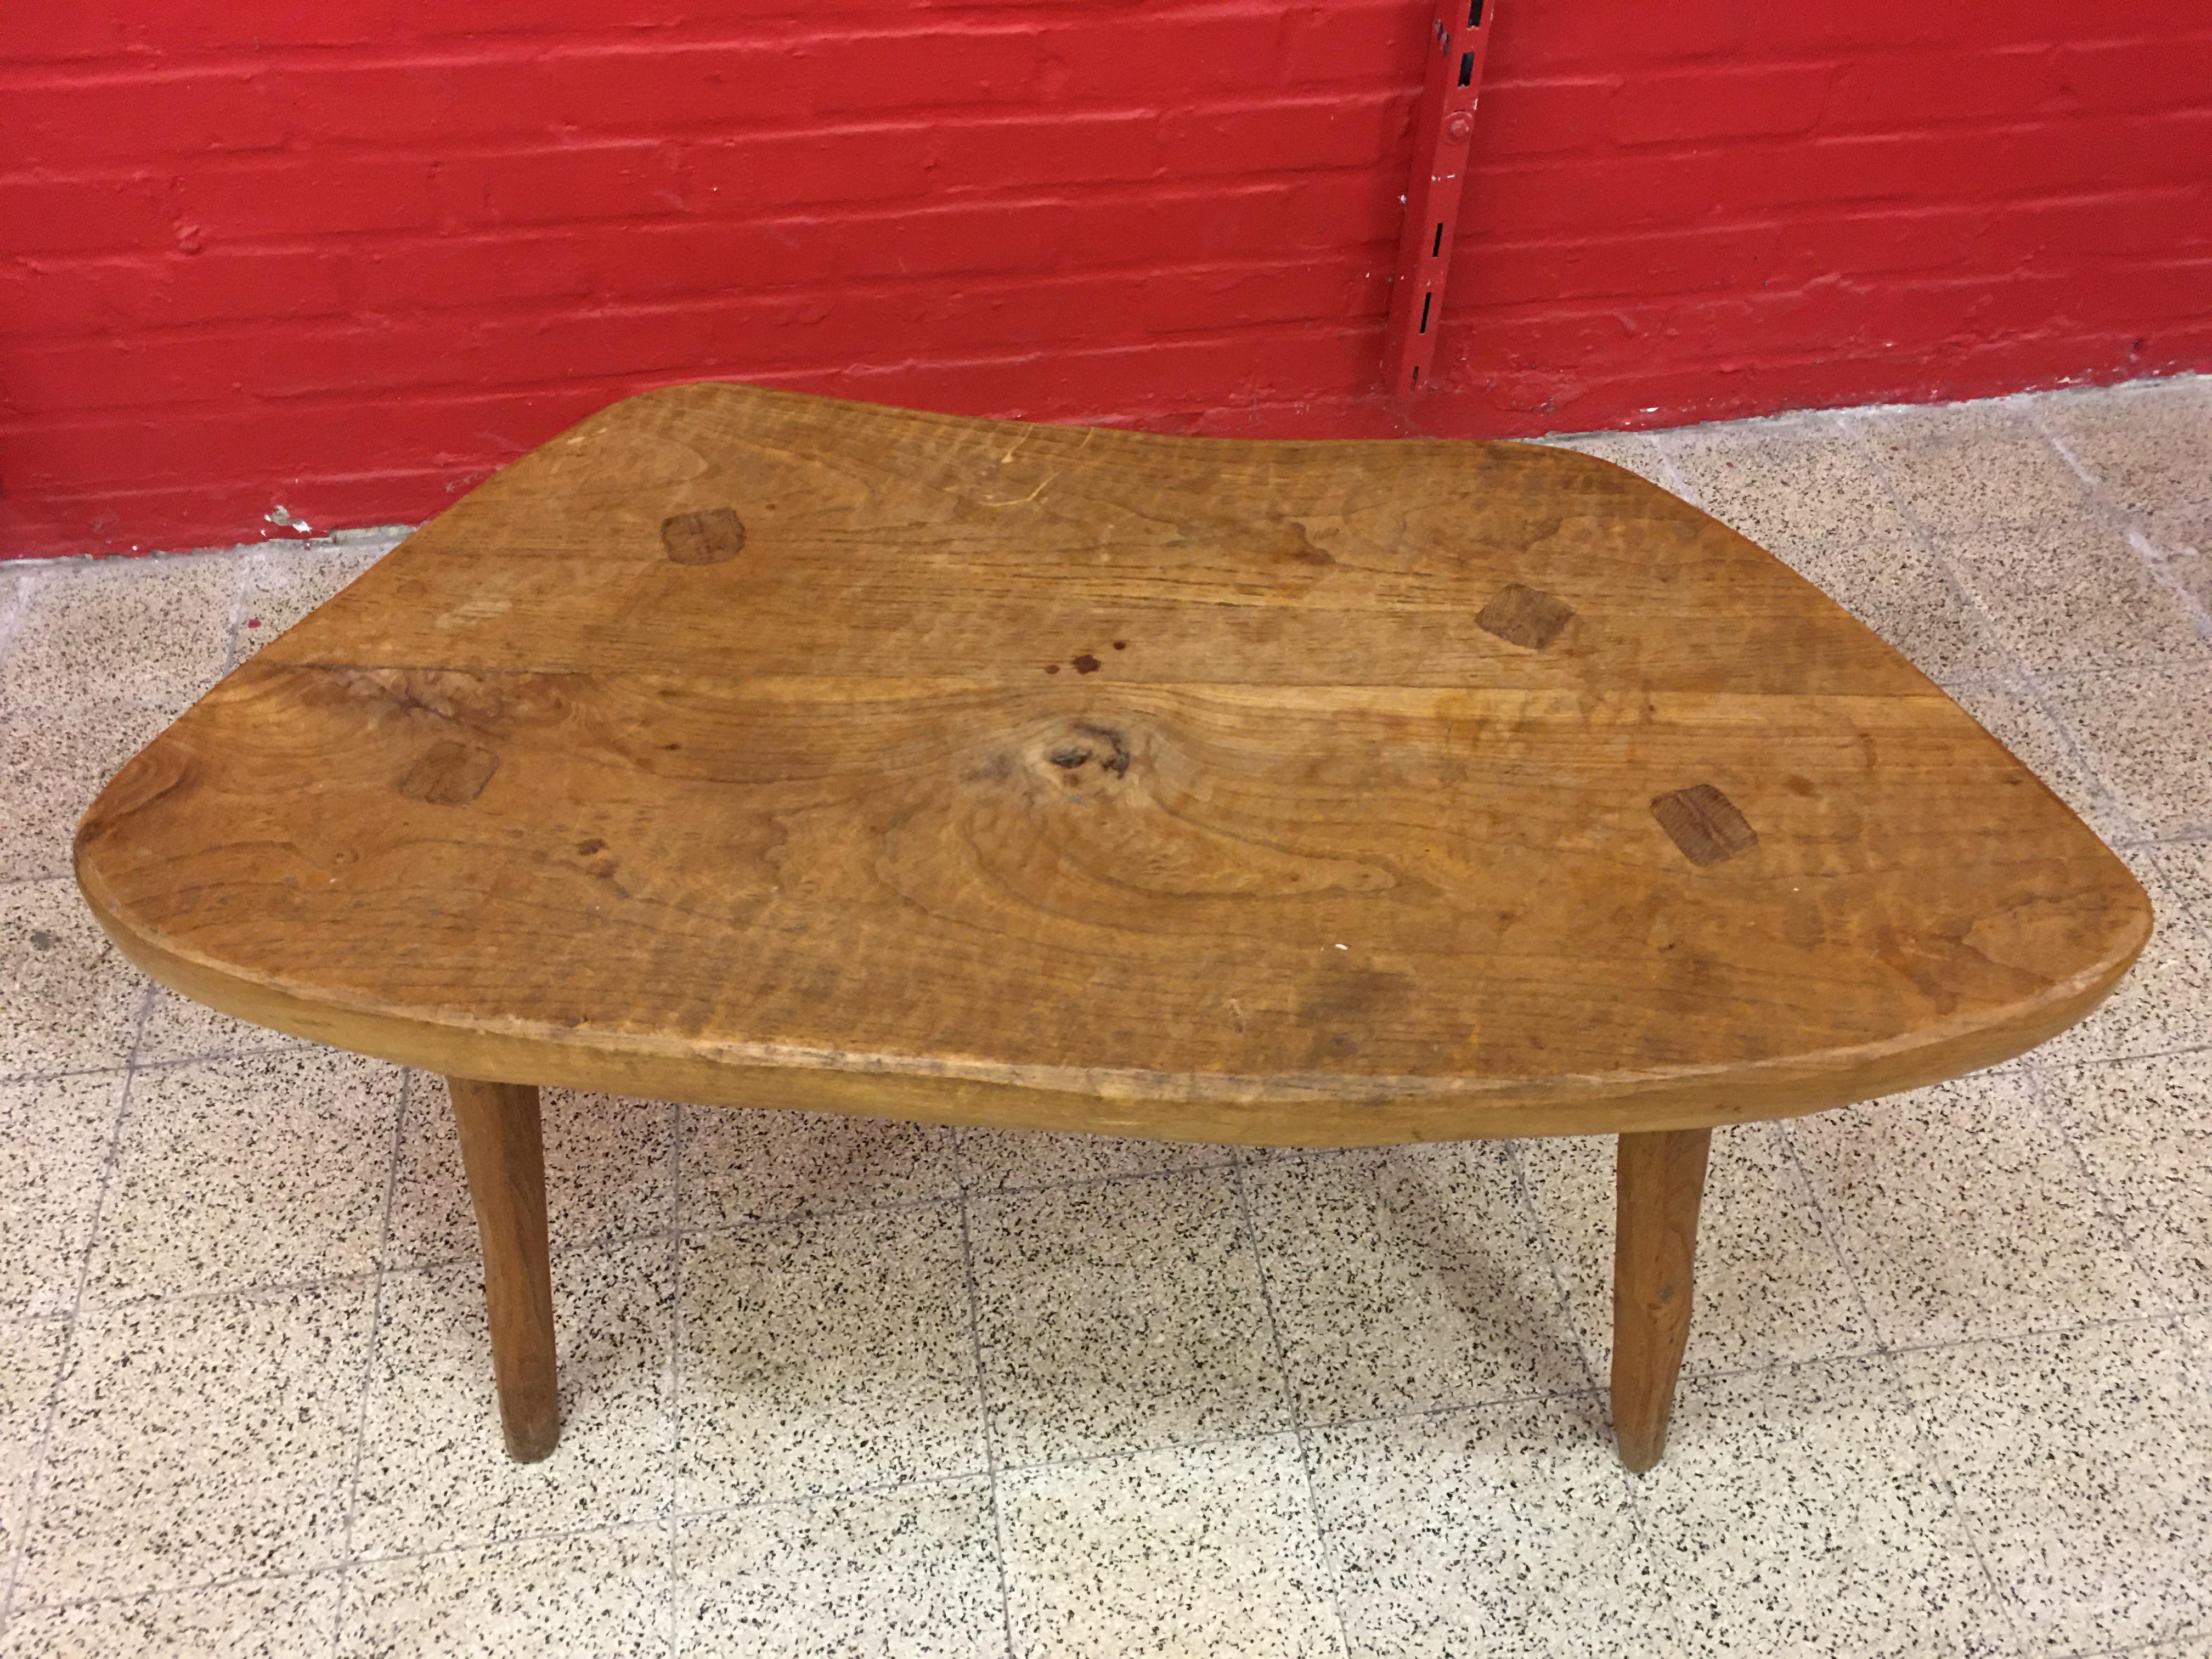 Mid-Century Modern Brutalist Freeform Coffee Table in Solid Elm, circa 1950-1960 For Sale